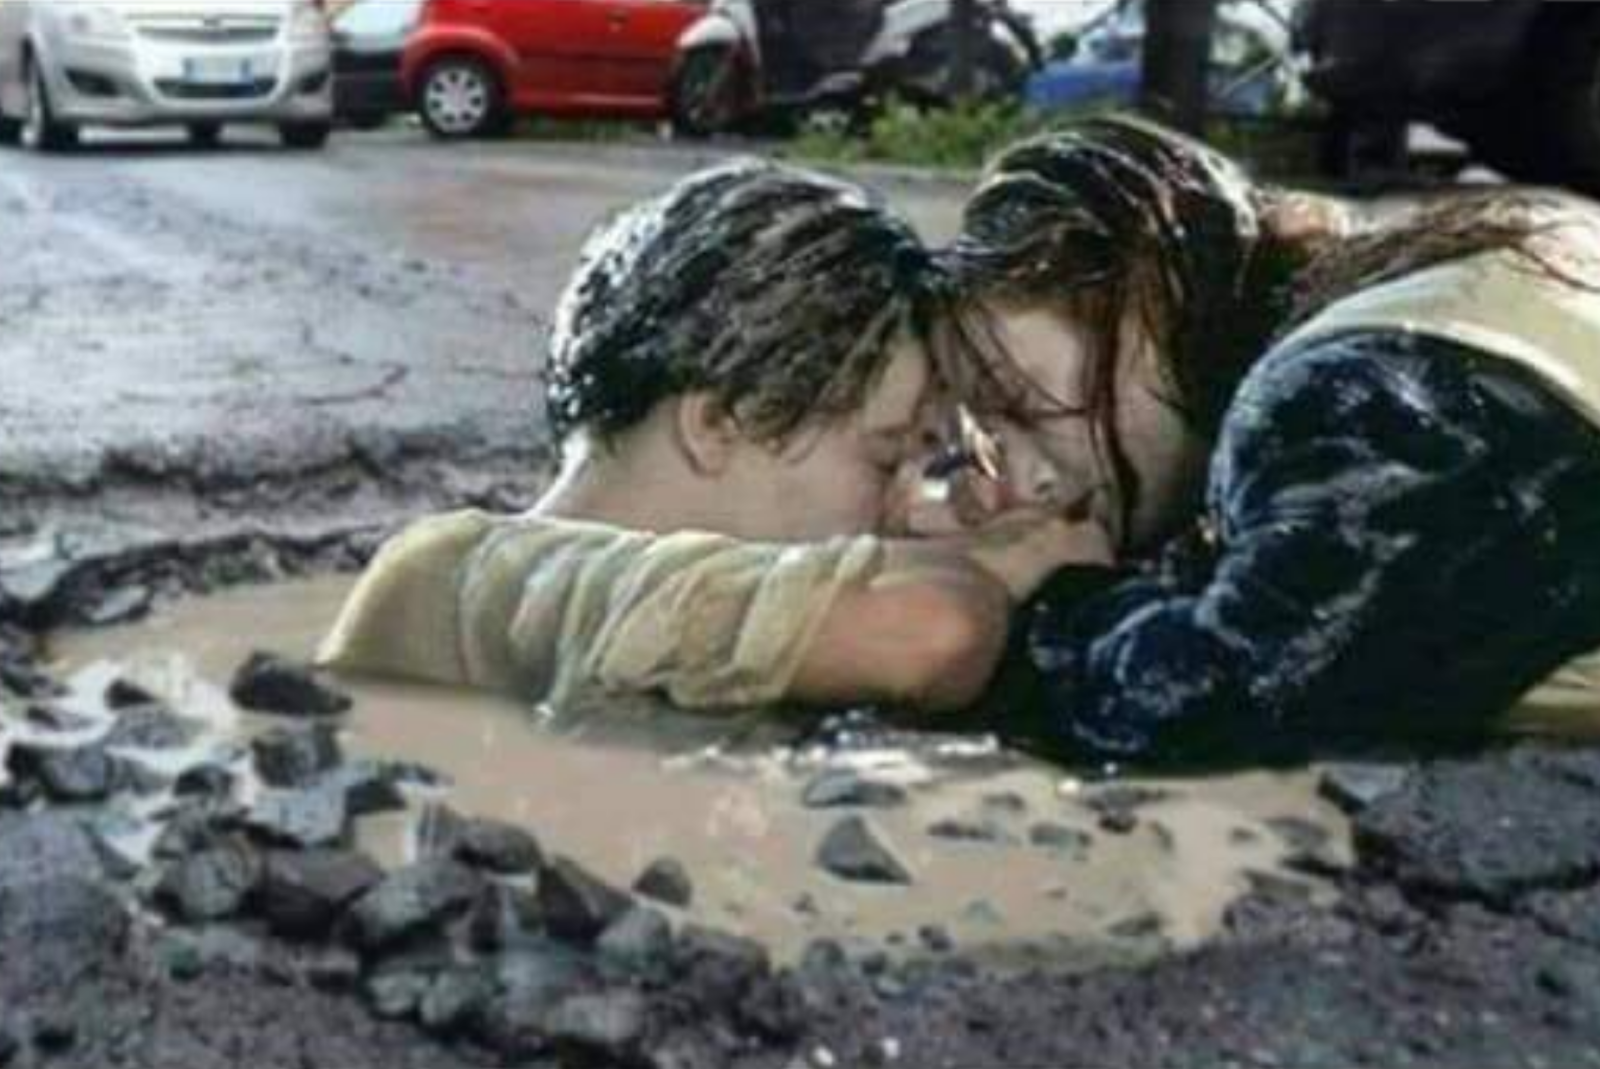 How can we make Britain great again when we can’t even fill pot holes?